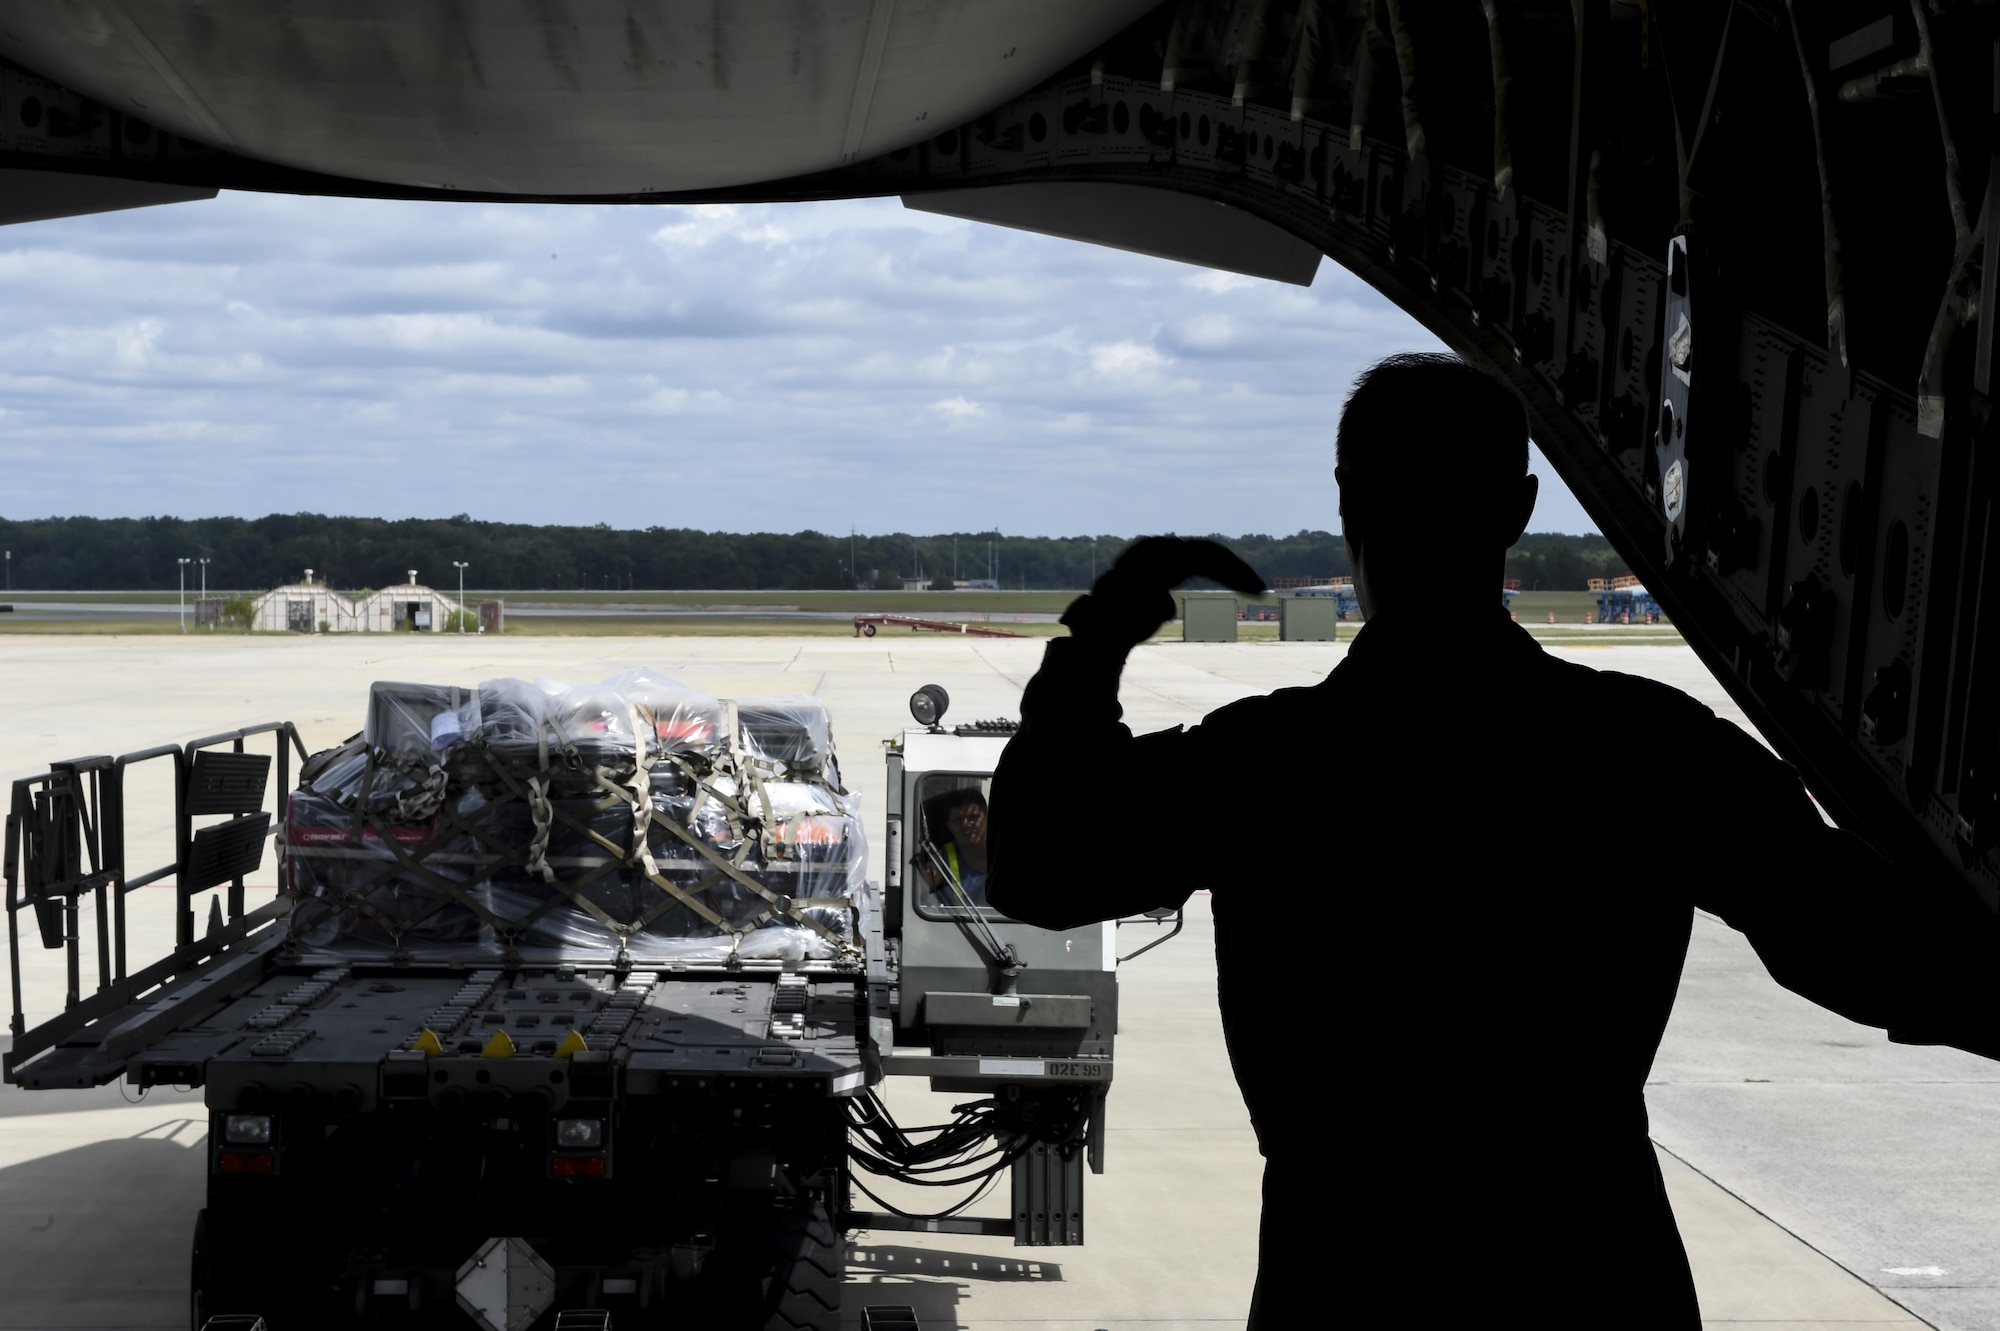 Tech Sgt. Joe Joiner, 16th Airlift Squadron loadmaster, guides a member of the 78th Logistics Readiness Squadron, Robins Air Force Base, Ga., as they load a cargo pallet on to the C-17 Globemaster III at the Robins AFB Aug. 29.